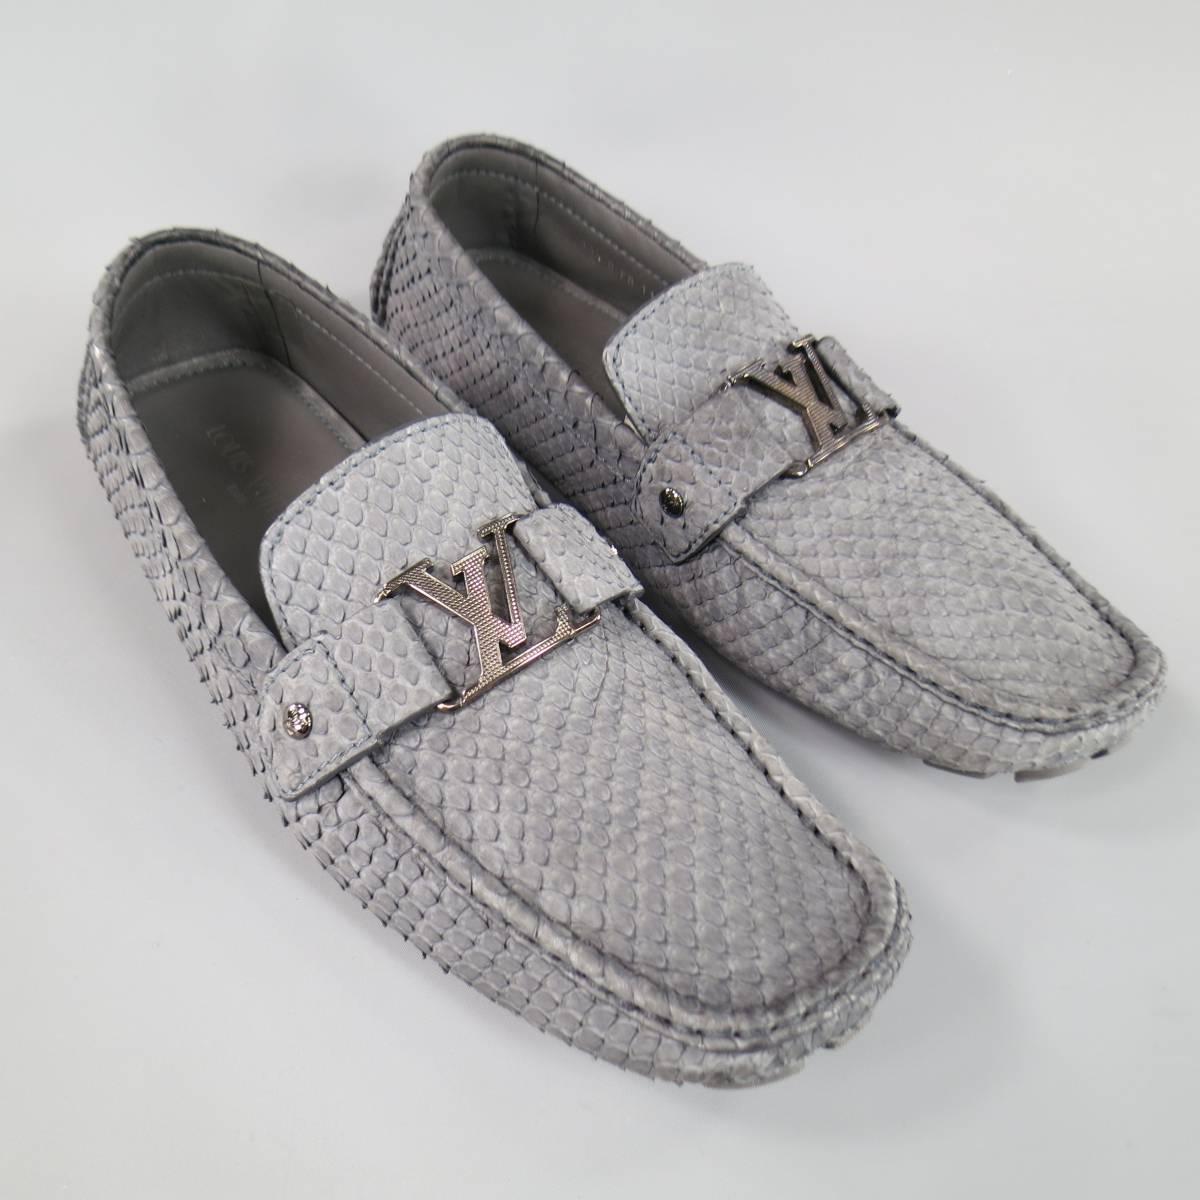 LOUIS VUITTON Loafers consists of snake-skin leather material in a dark grey color tone. Designed in a driver style, square-toe front, top edging trim with tone-on-tone stitching throughout body. Textured appearance with large silver 